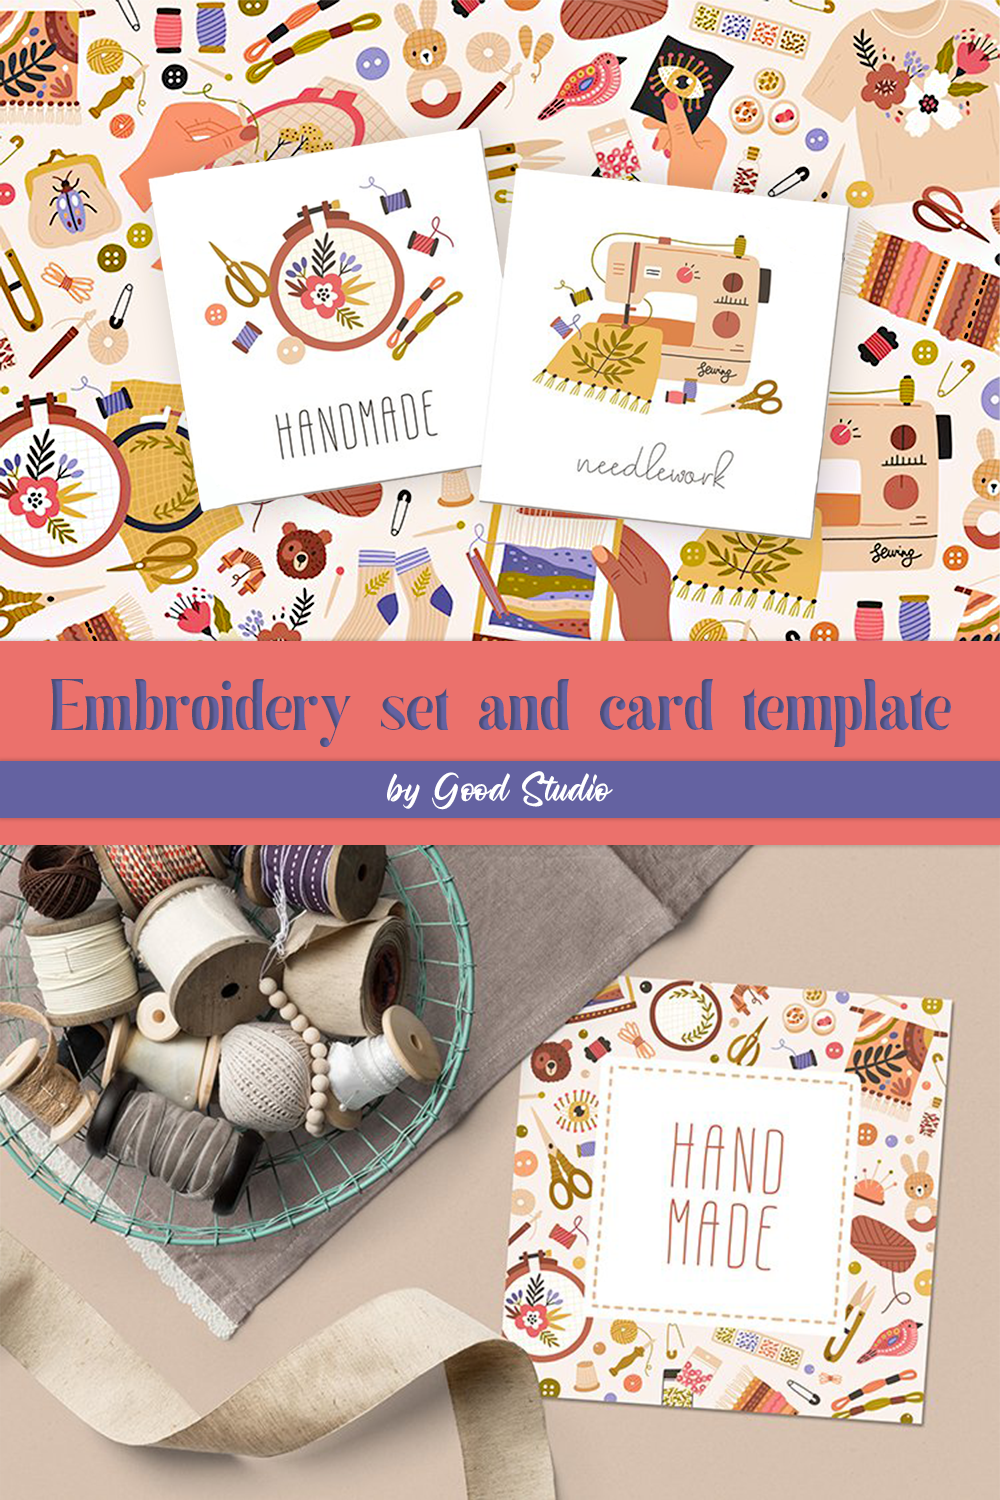 Embroidery set and card template of pinterest.